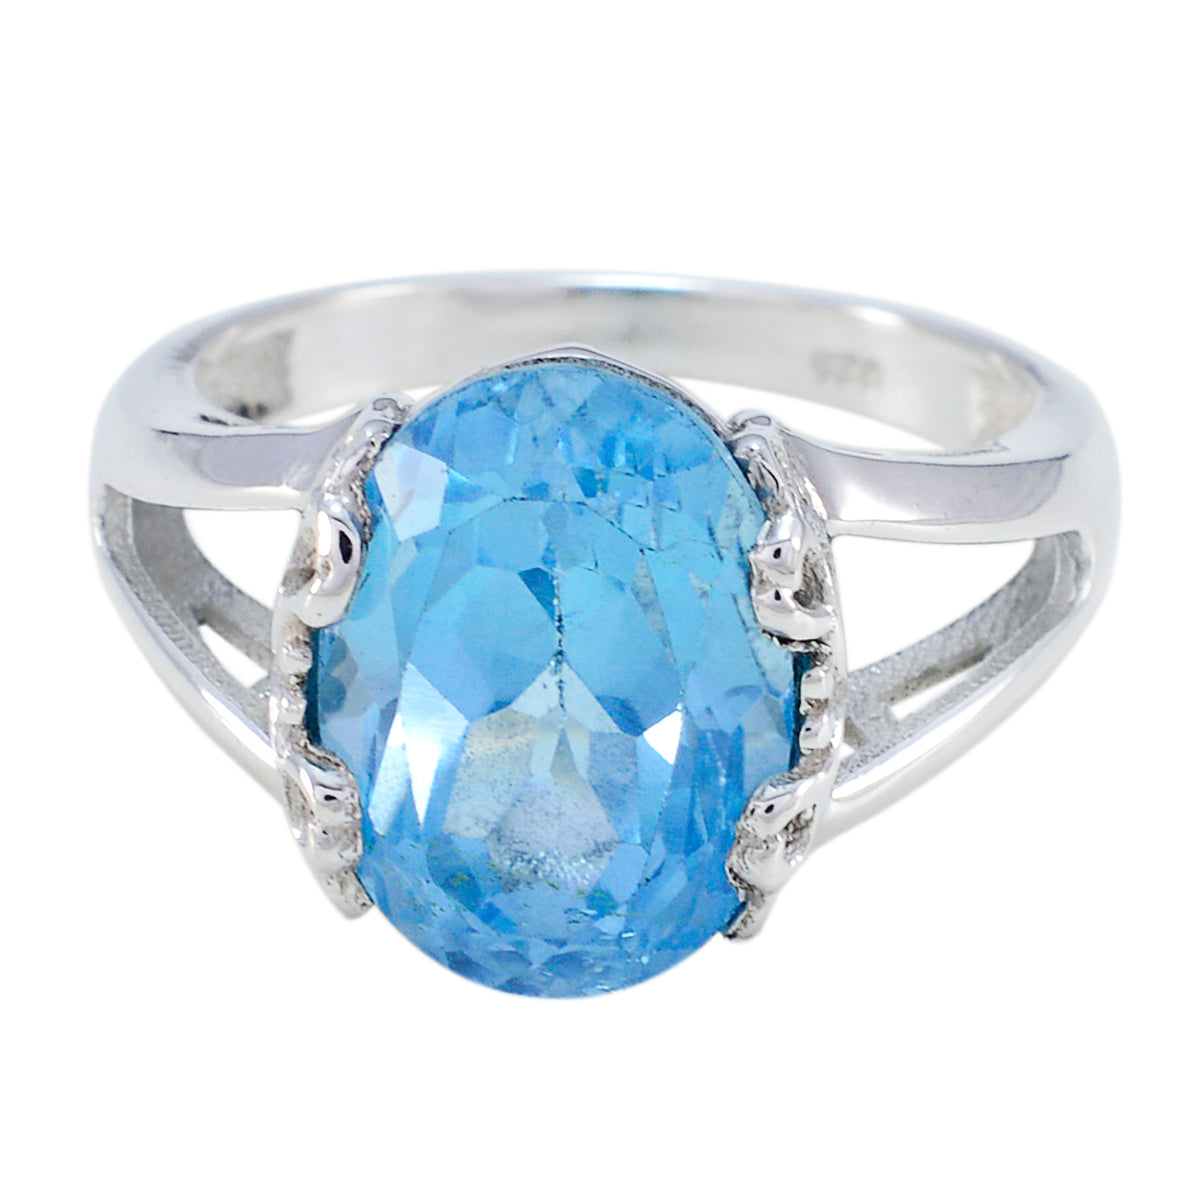 Cunning Gemstone Blue Topaz Sterling Silver Ring Jewelry Packaging